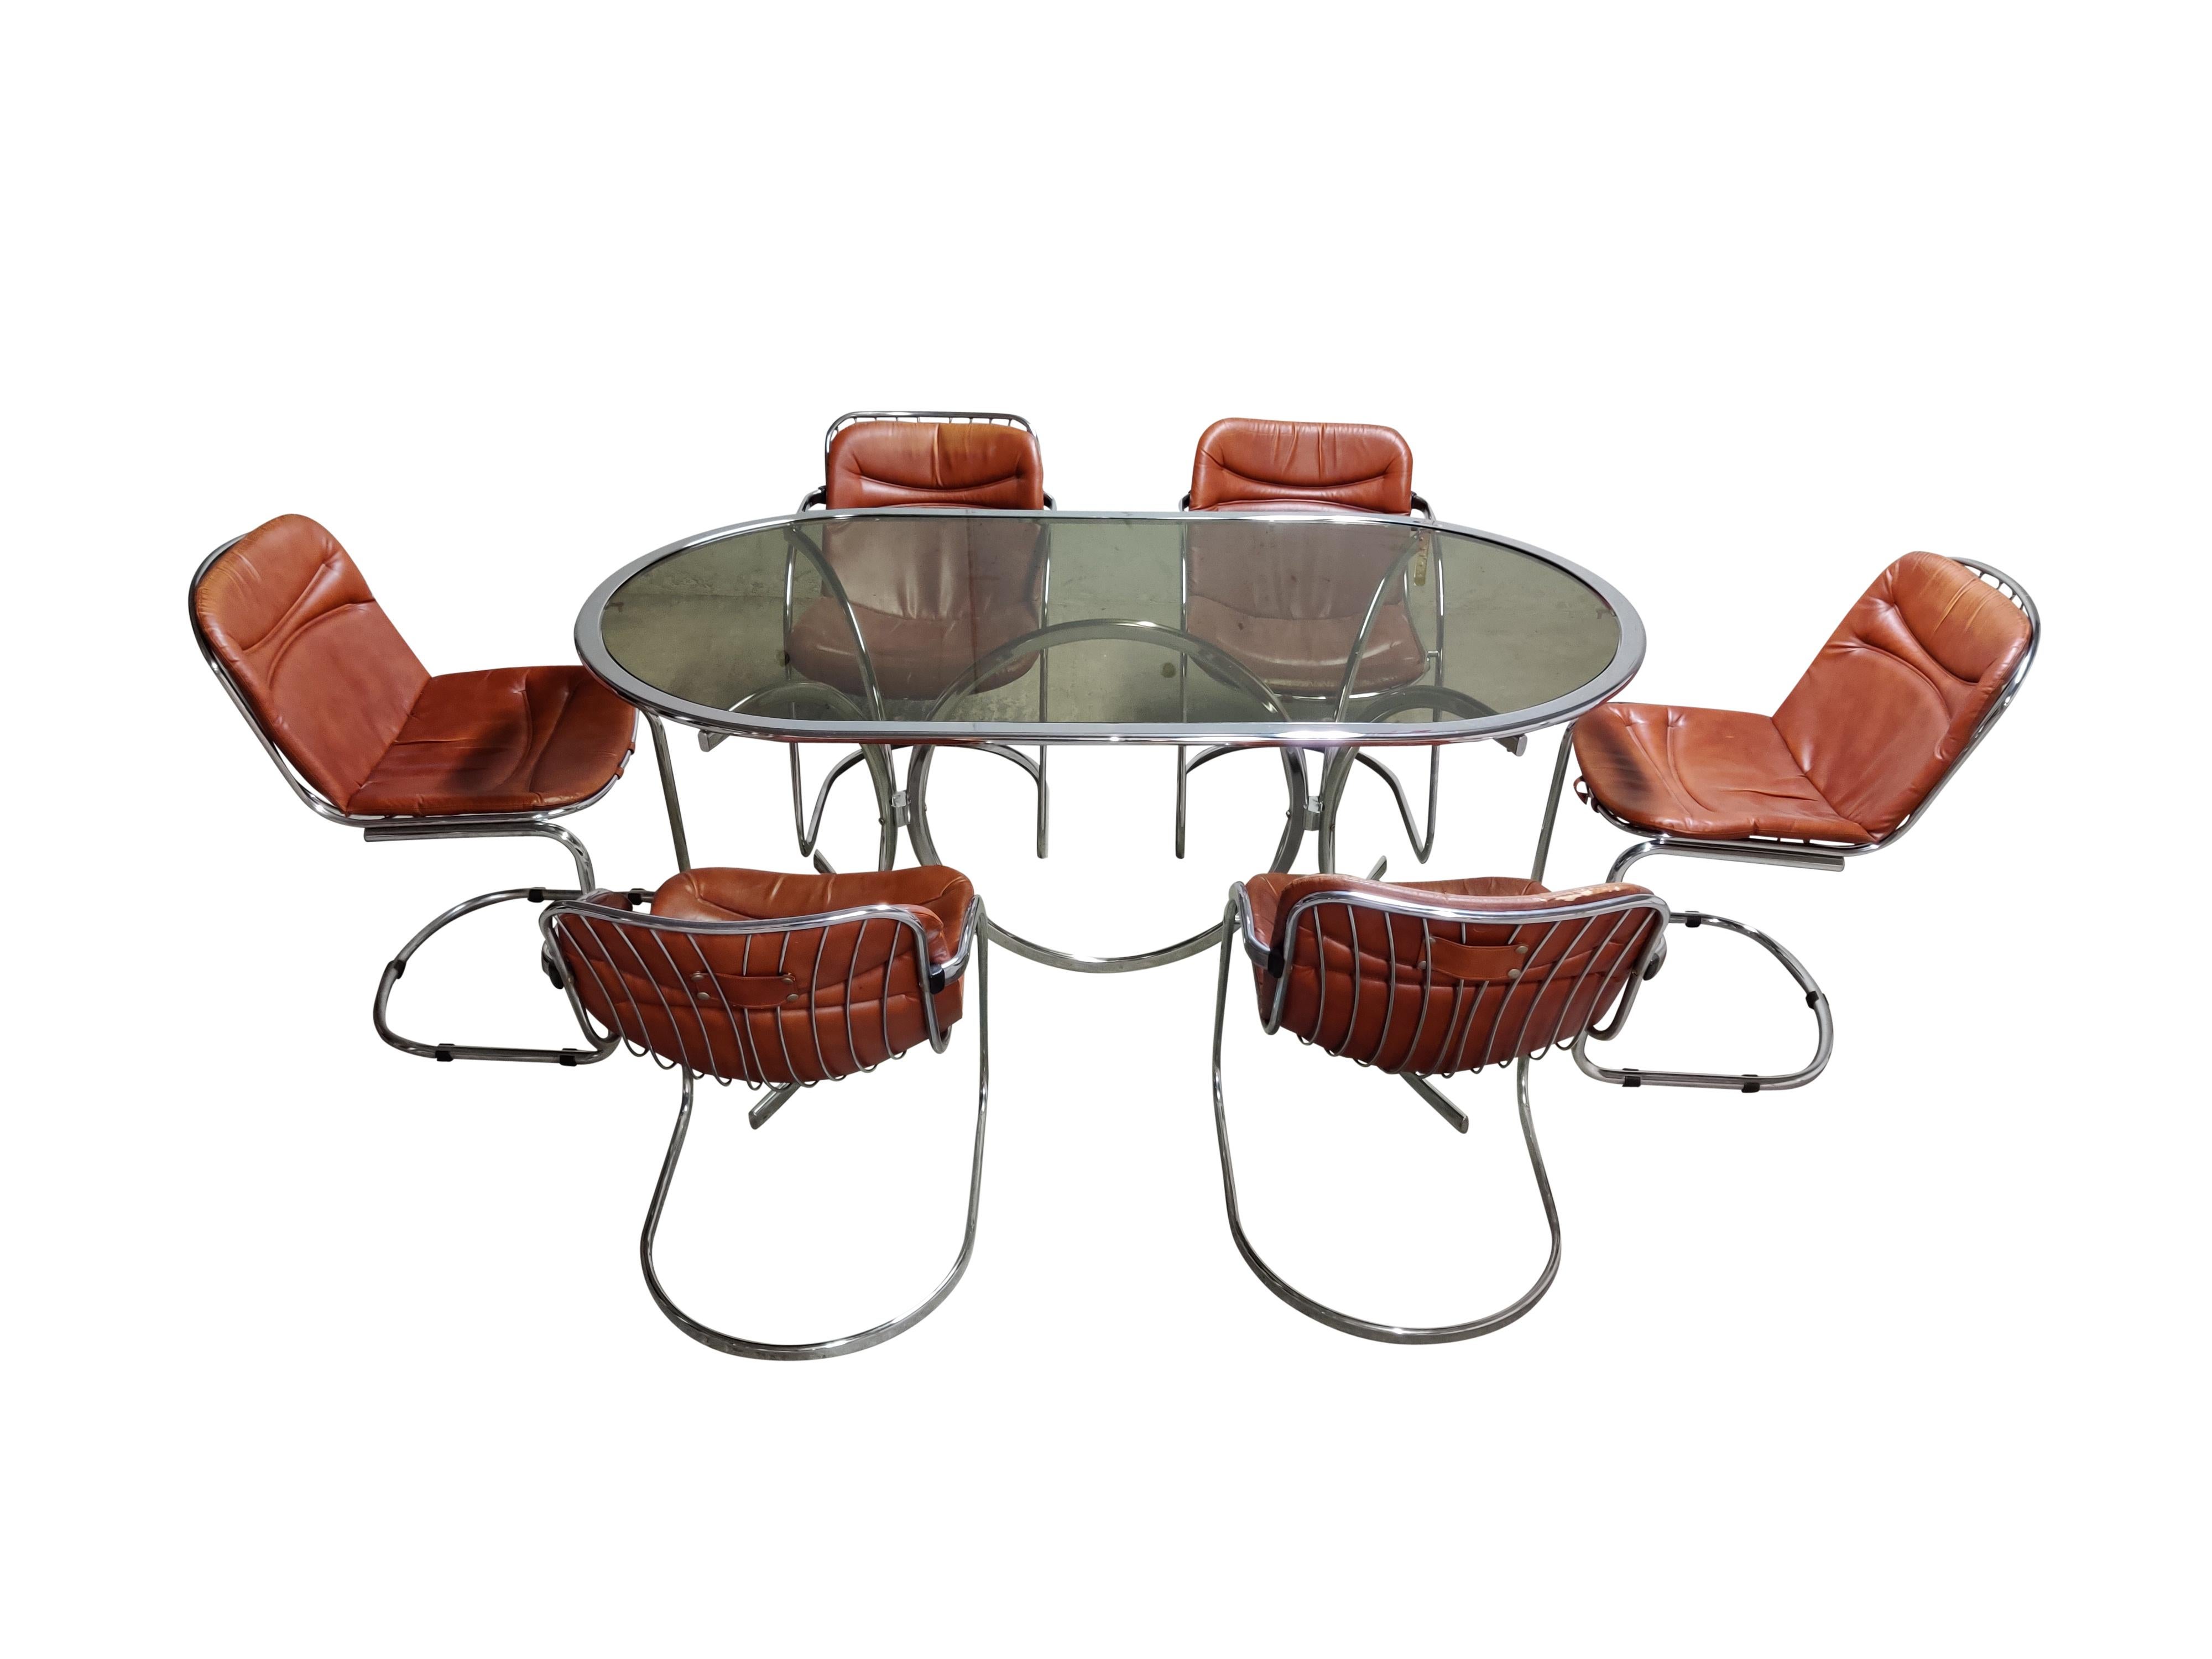 Vintage dining room set by Gastone Rinaldi for Rima Italy.

The set consists of one chrome table with an oval smoked glass top and six leather chairs (4 with armrests and two without).

The table is in good condition with patina and undamaged